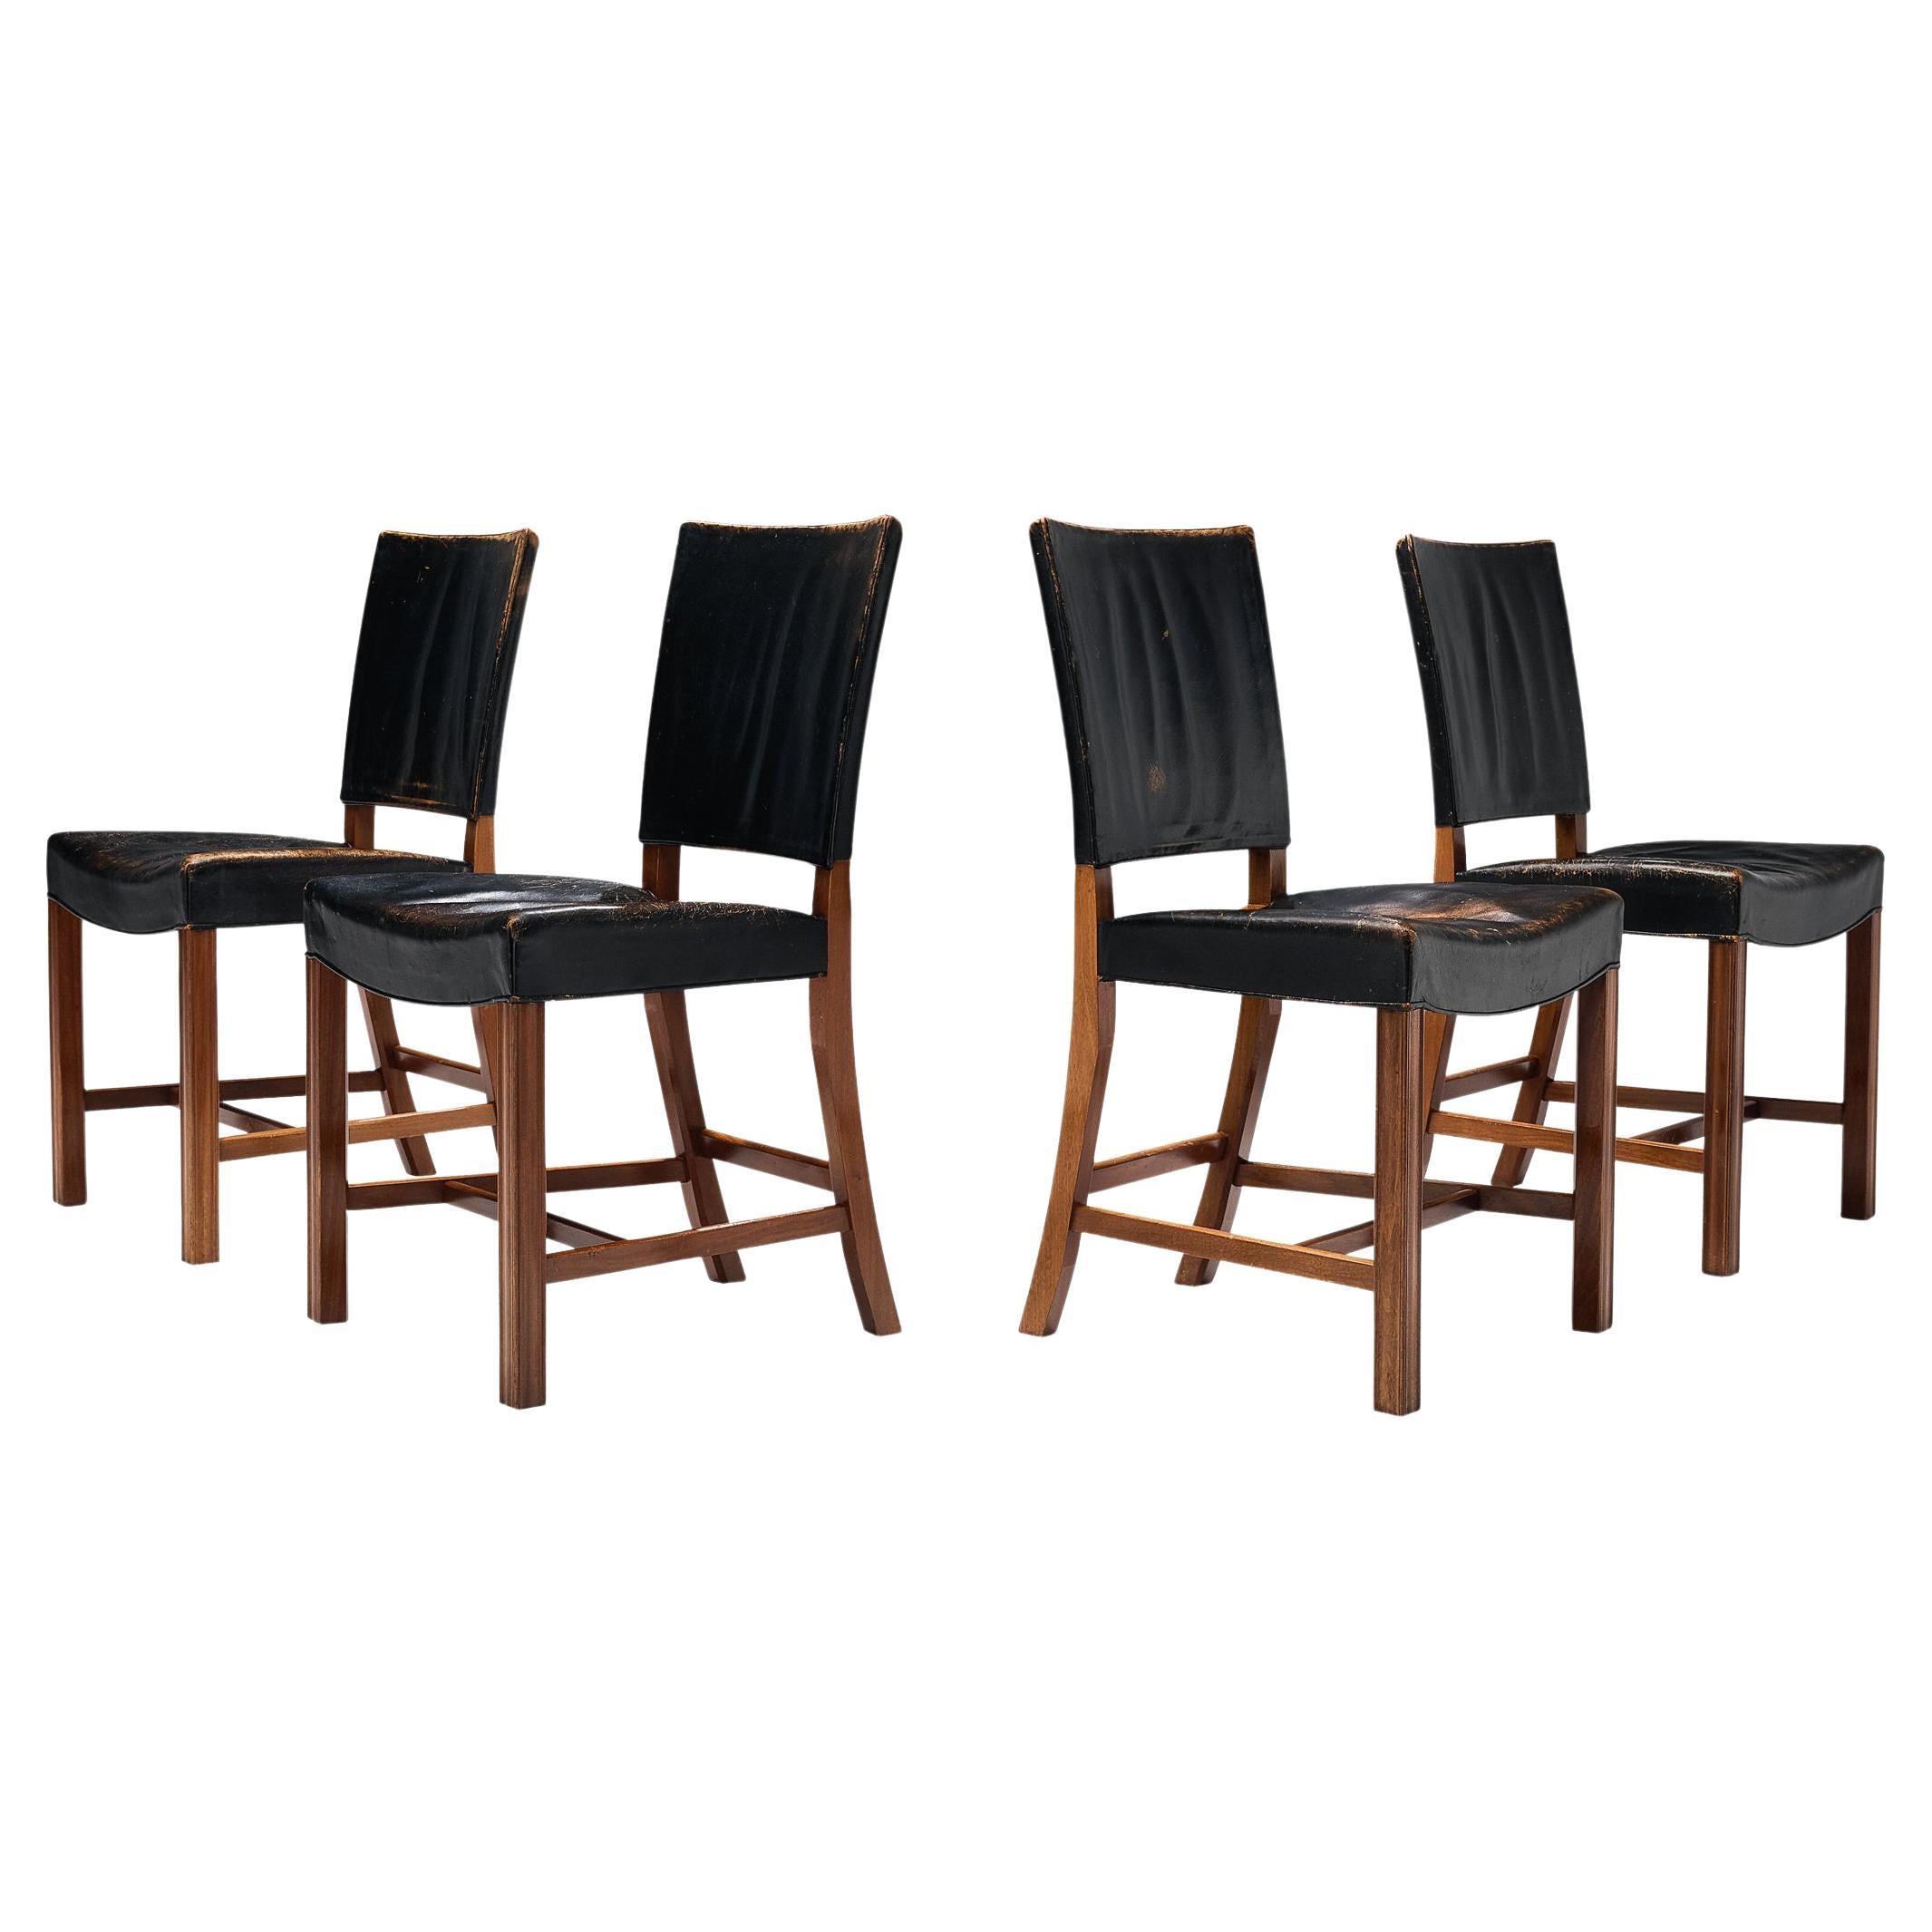 Kaare Klint for Rud Rasmussen Set of Four 'Red Chairs' in Original Leather 